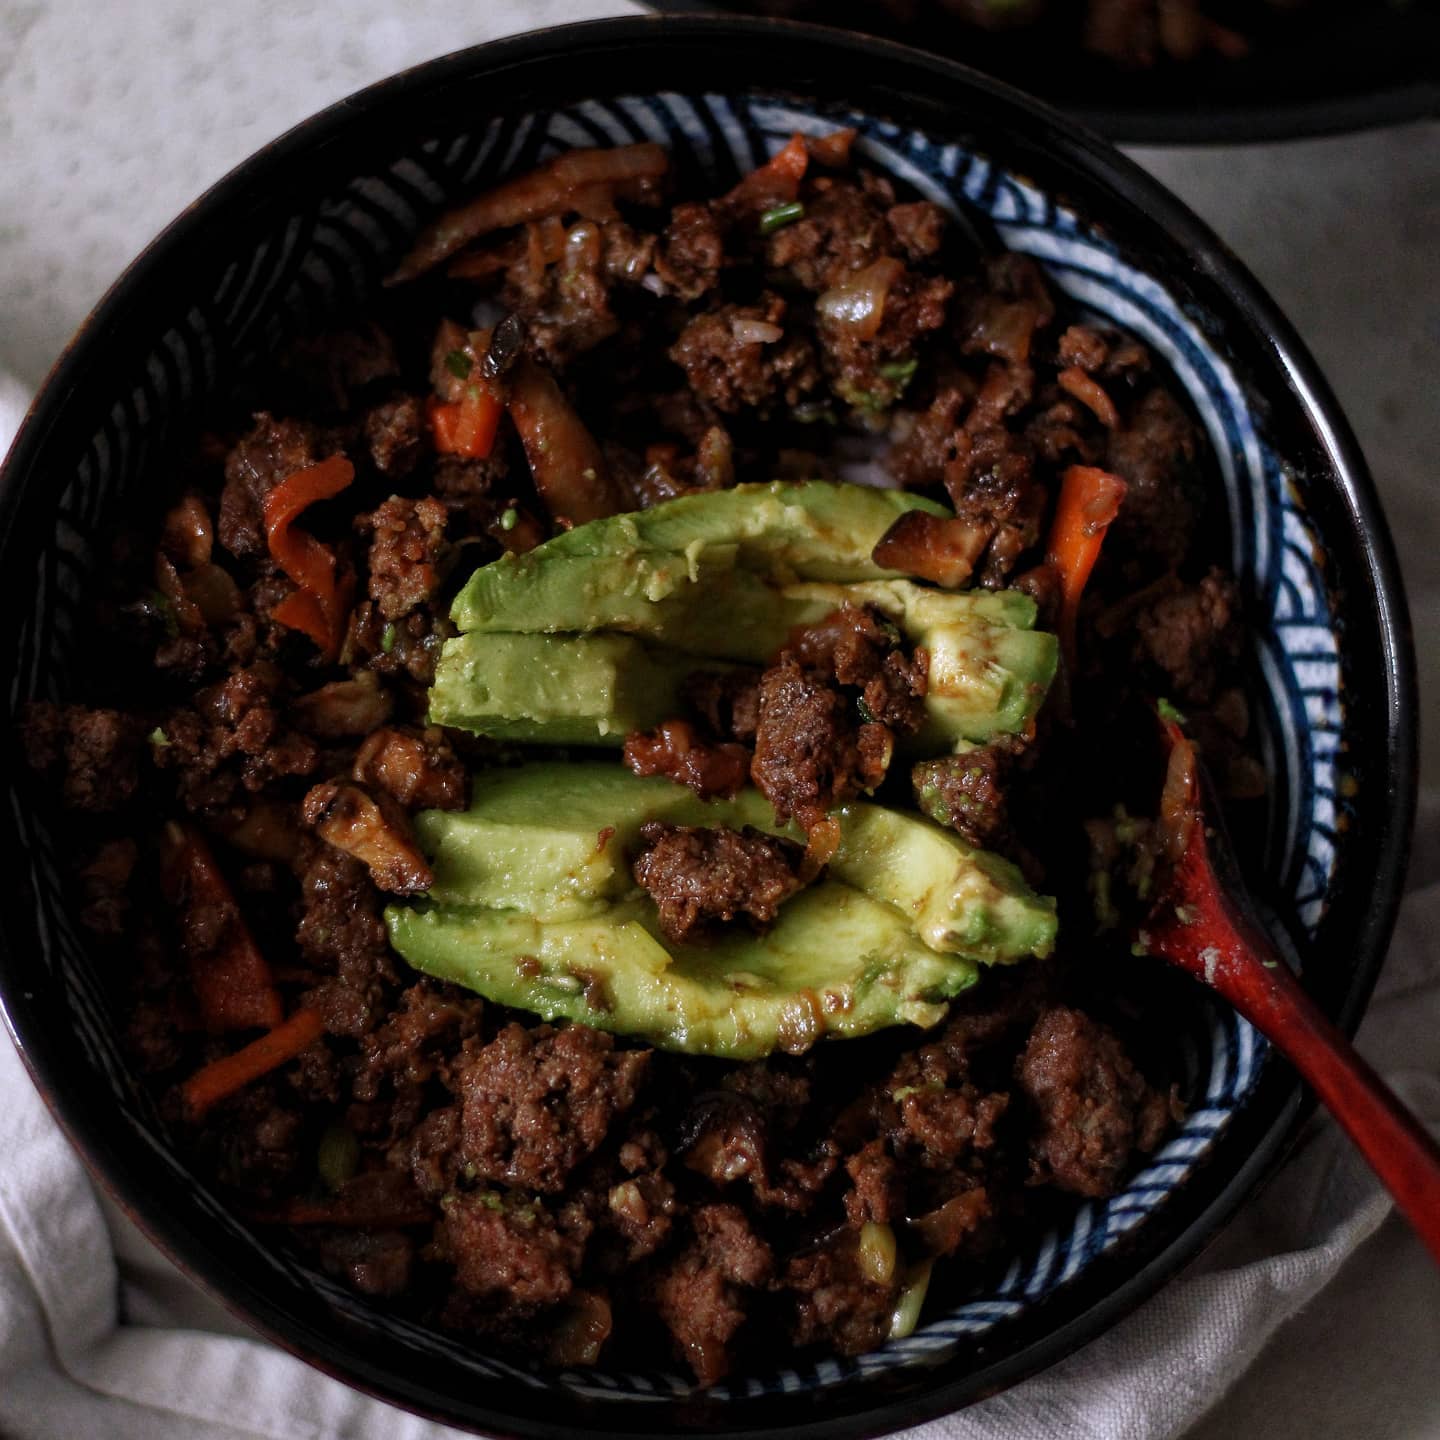 Asian ground beef bowls! Super quick and ez, perfect for an end of week fridge cleanup! Link in in bio as always ✨

#beefbowl #asianmeal #simplehomecooking #cookandshare #recipeideas #cookfromhome #betterthantakeout #asianflavors #eathomemade #chinesecooking